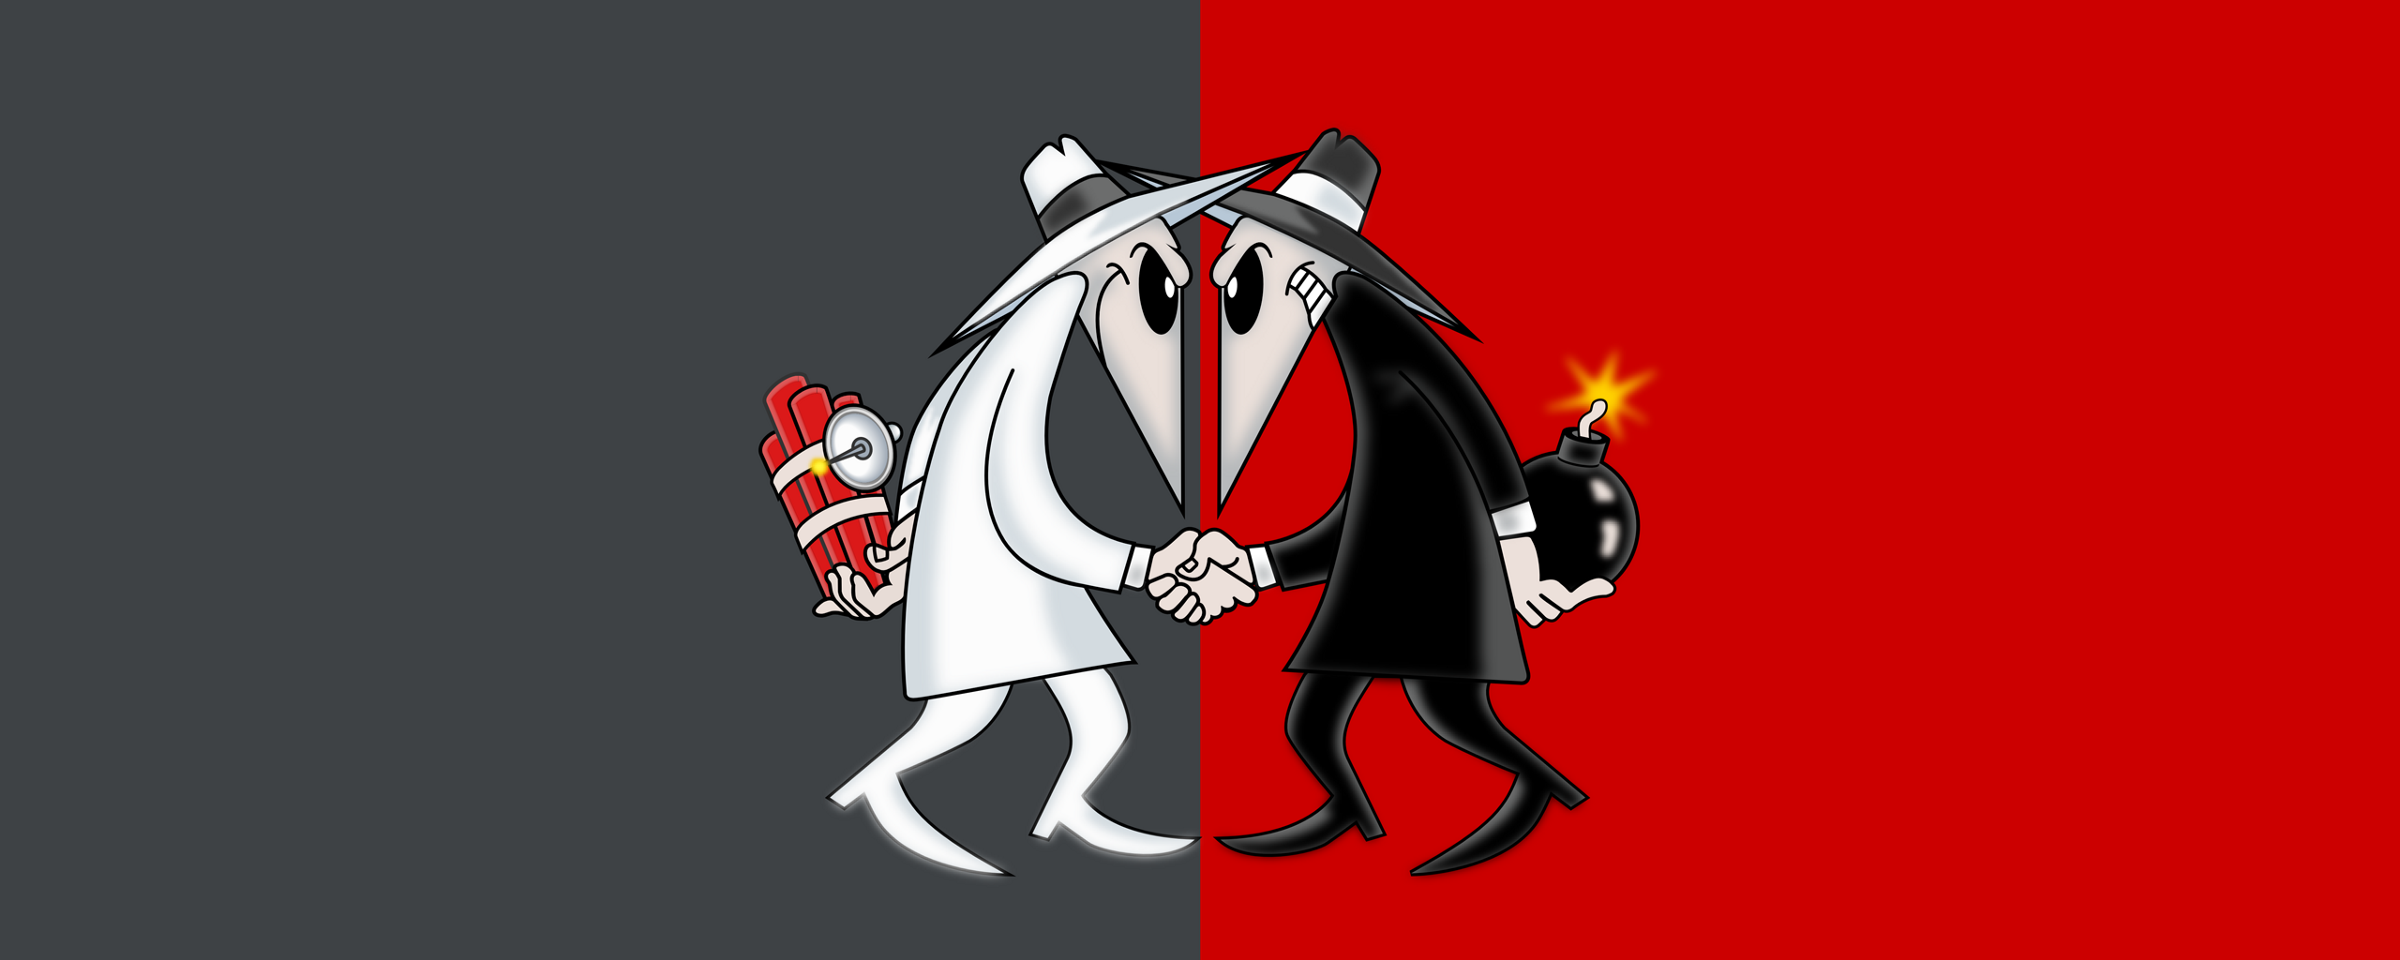 An image of the two spys from the comic &ldquo;Spy vs. Spy&rdquo; shaking hands